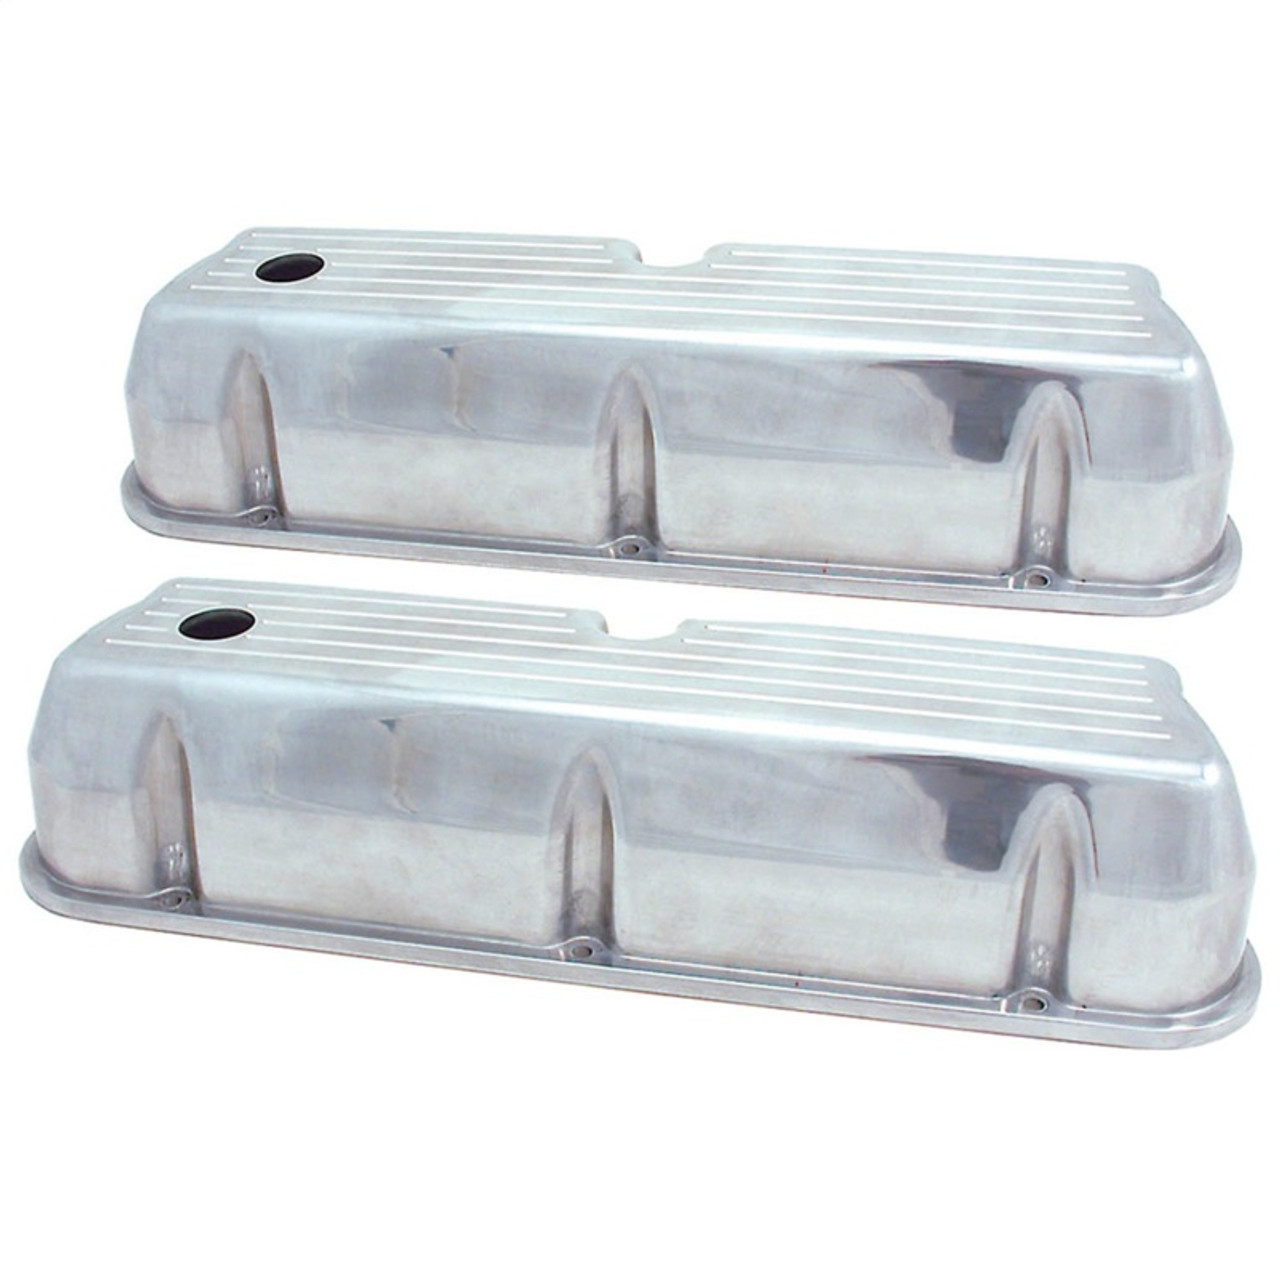 Spectre Performance 5250 Valve Cover for Small Block Ford - 3